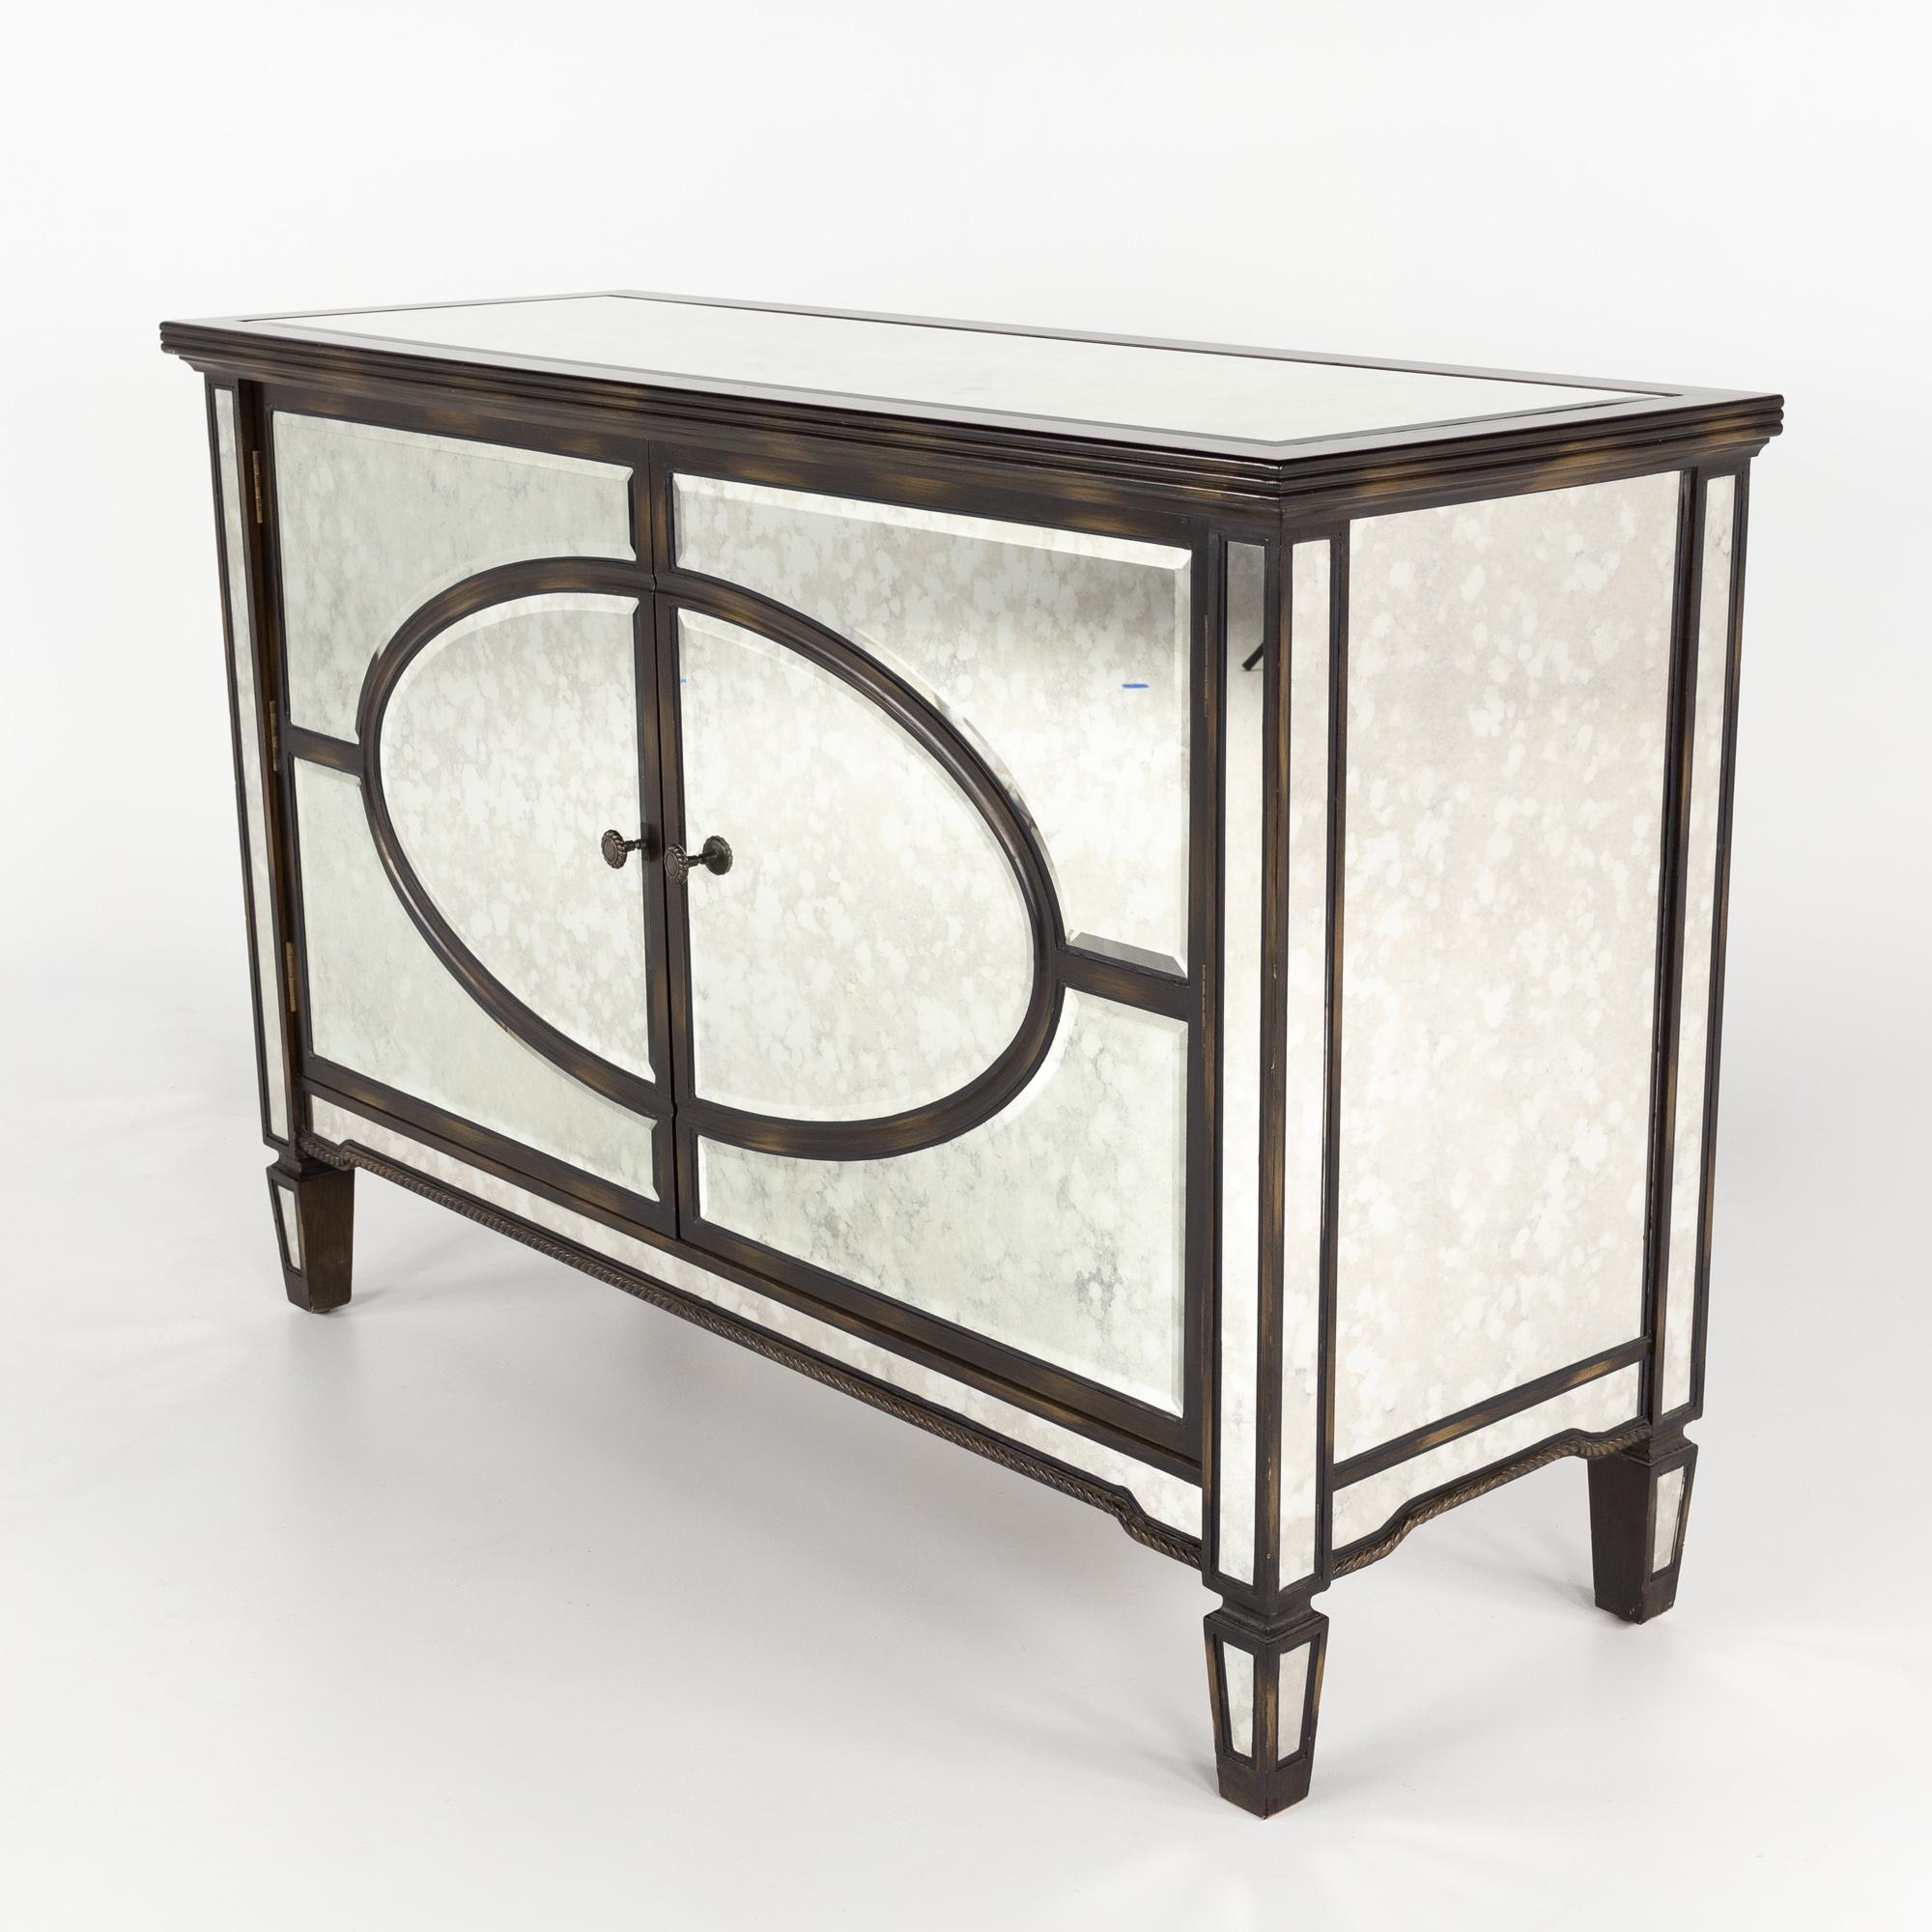 Arhaus contemporary mirrored credenza buffet

This buffet measures: 50 wide x 20 deep x 38 inches high

This piece is in Good Vintage Condition - There are a couple of scratches in the glass, one on top of the piece. The door handle is bent and